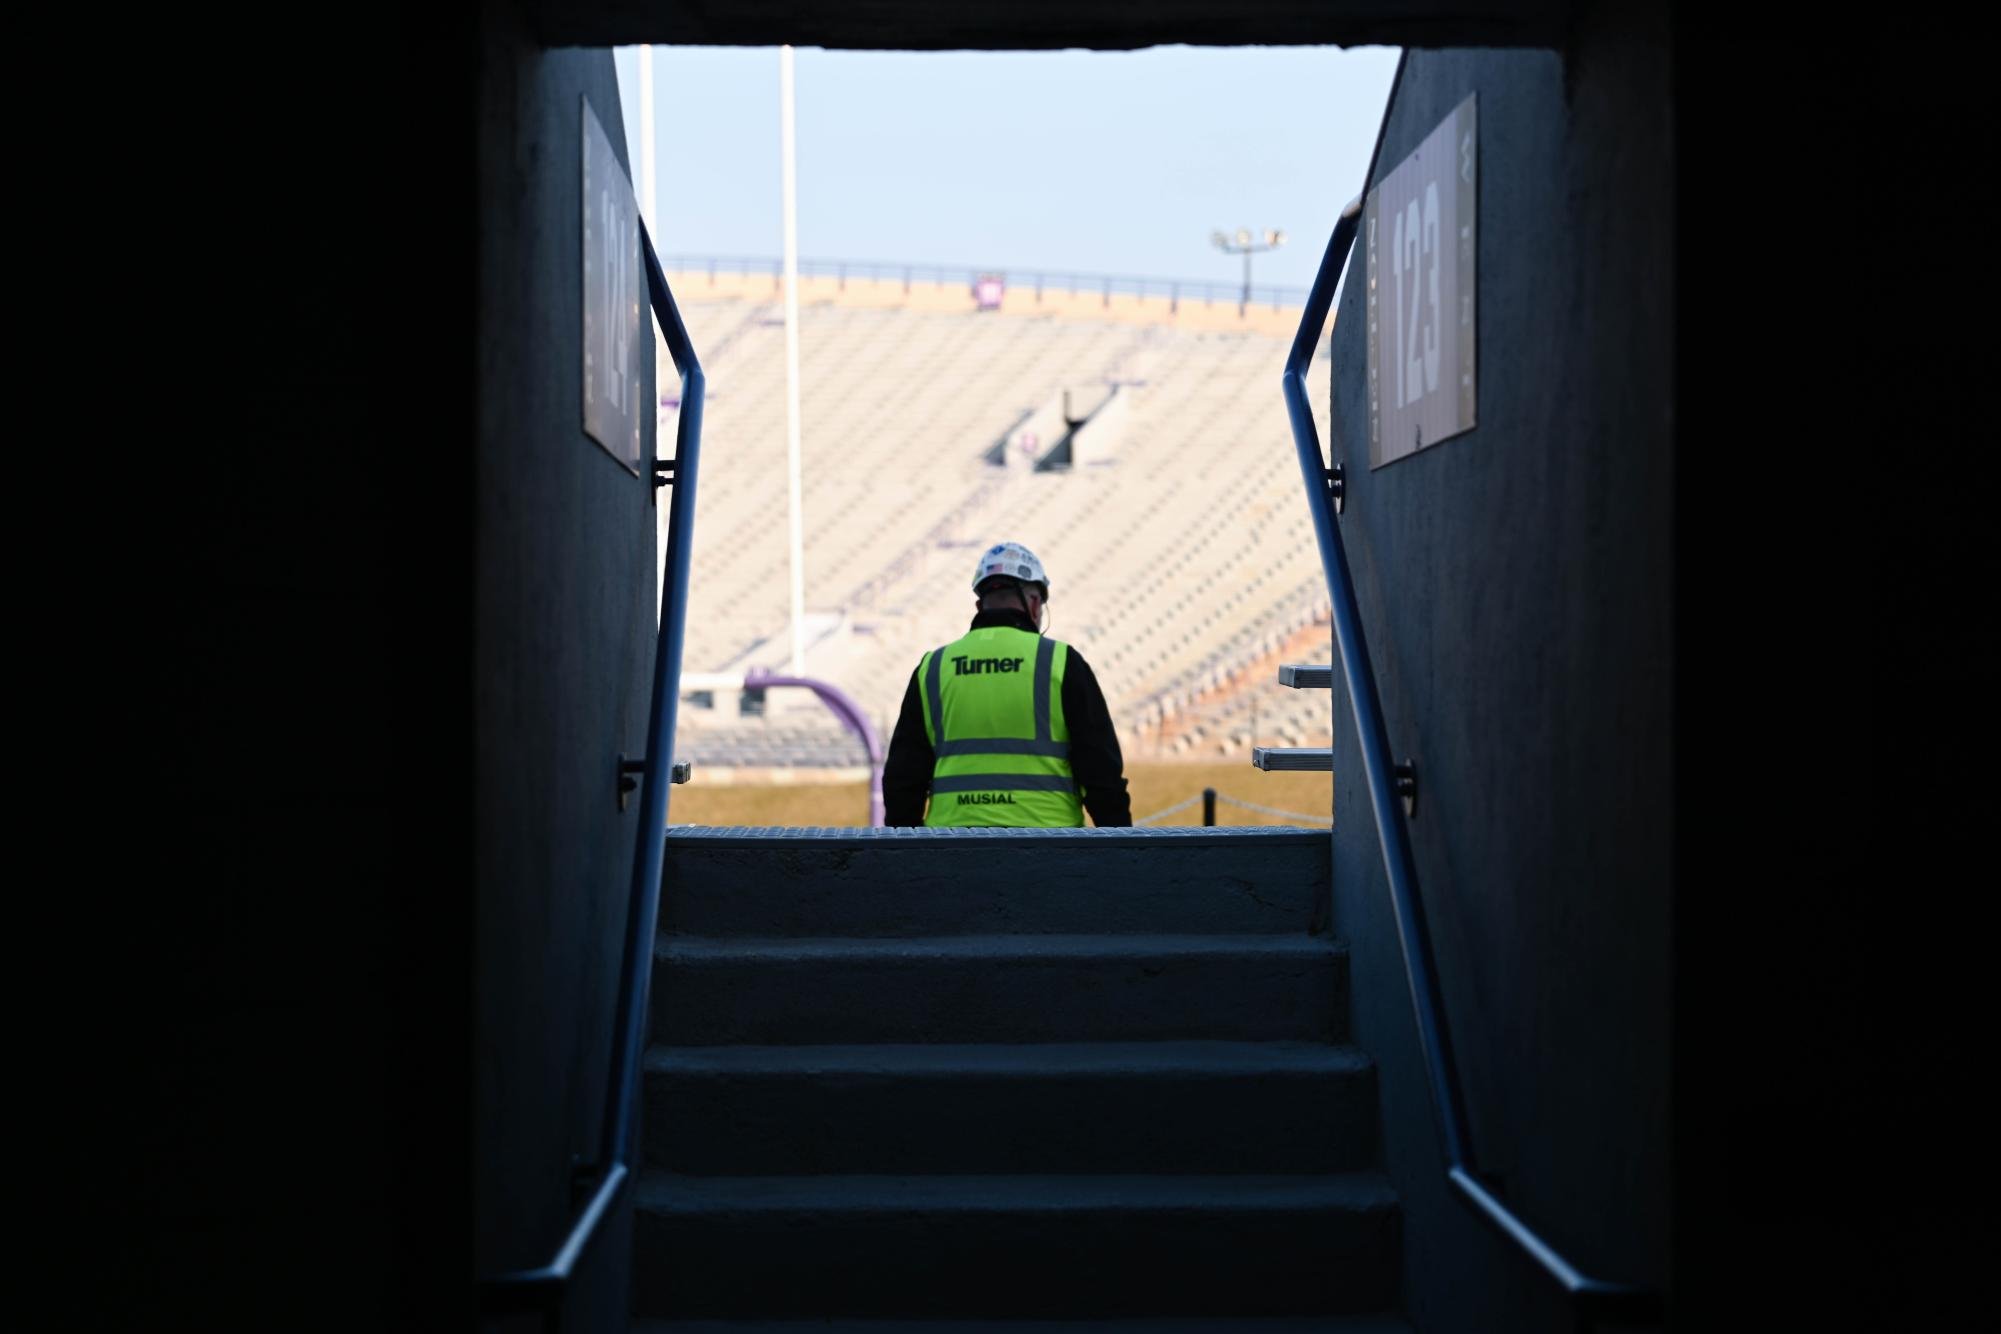 A man wearing a hard hat looks out at bleachers in a football stadium.